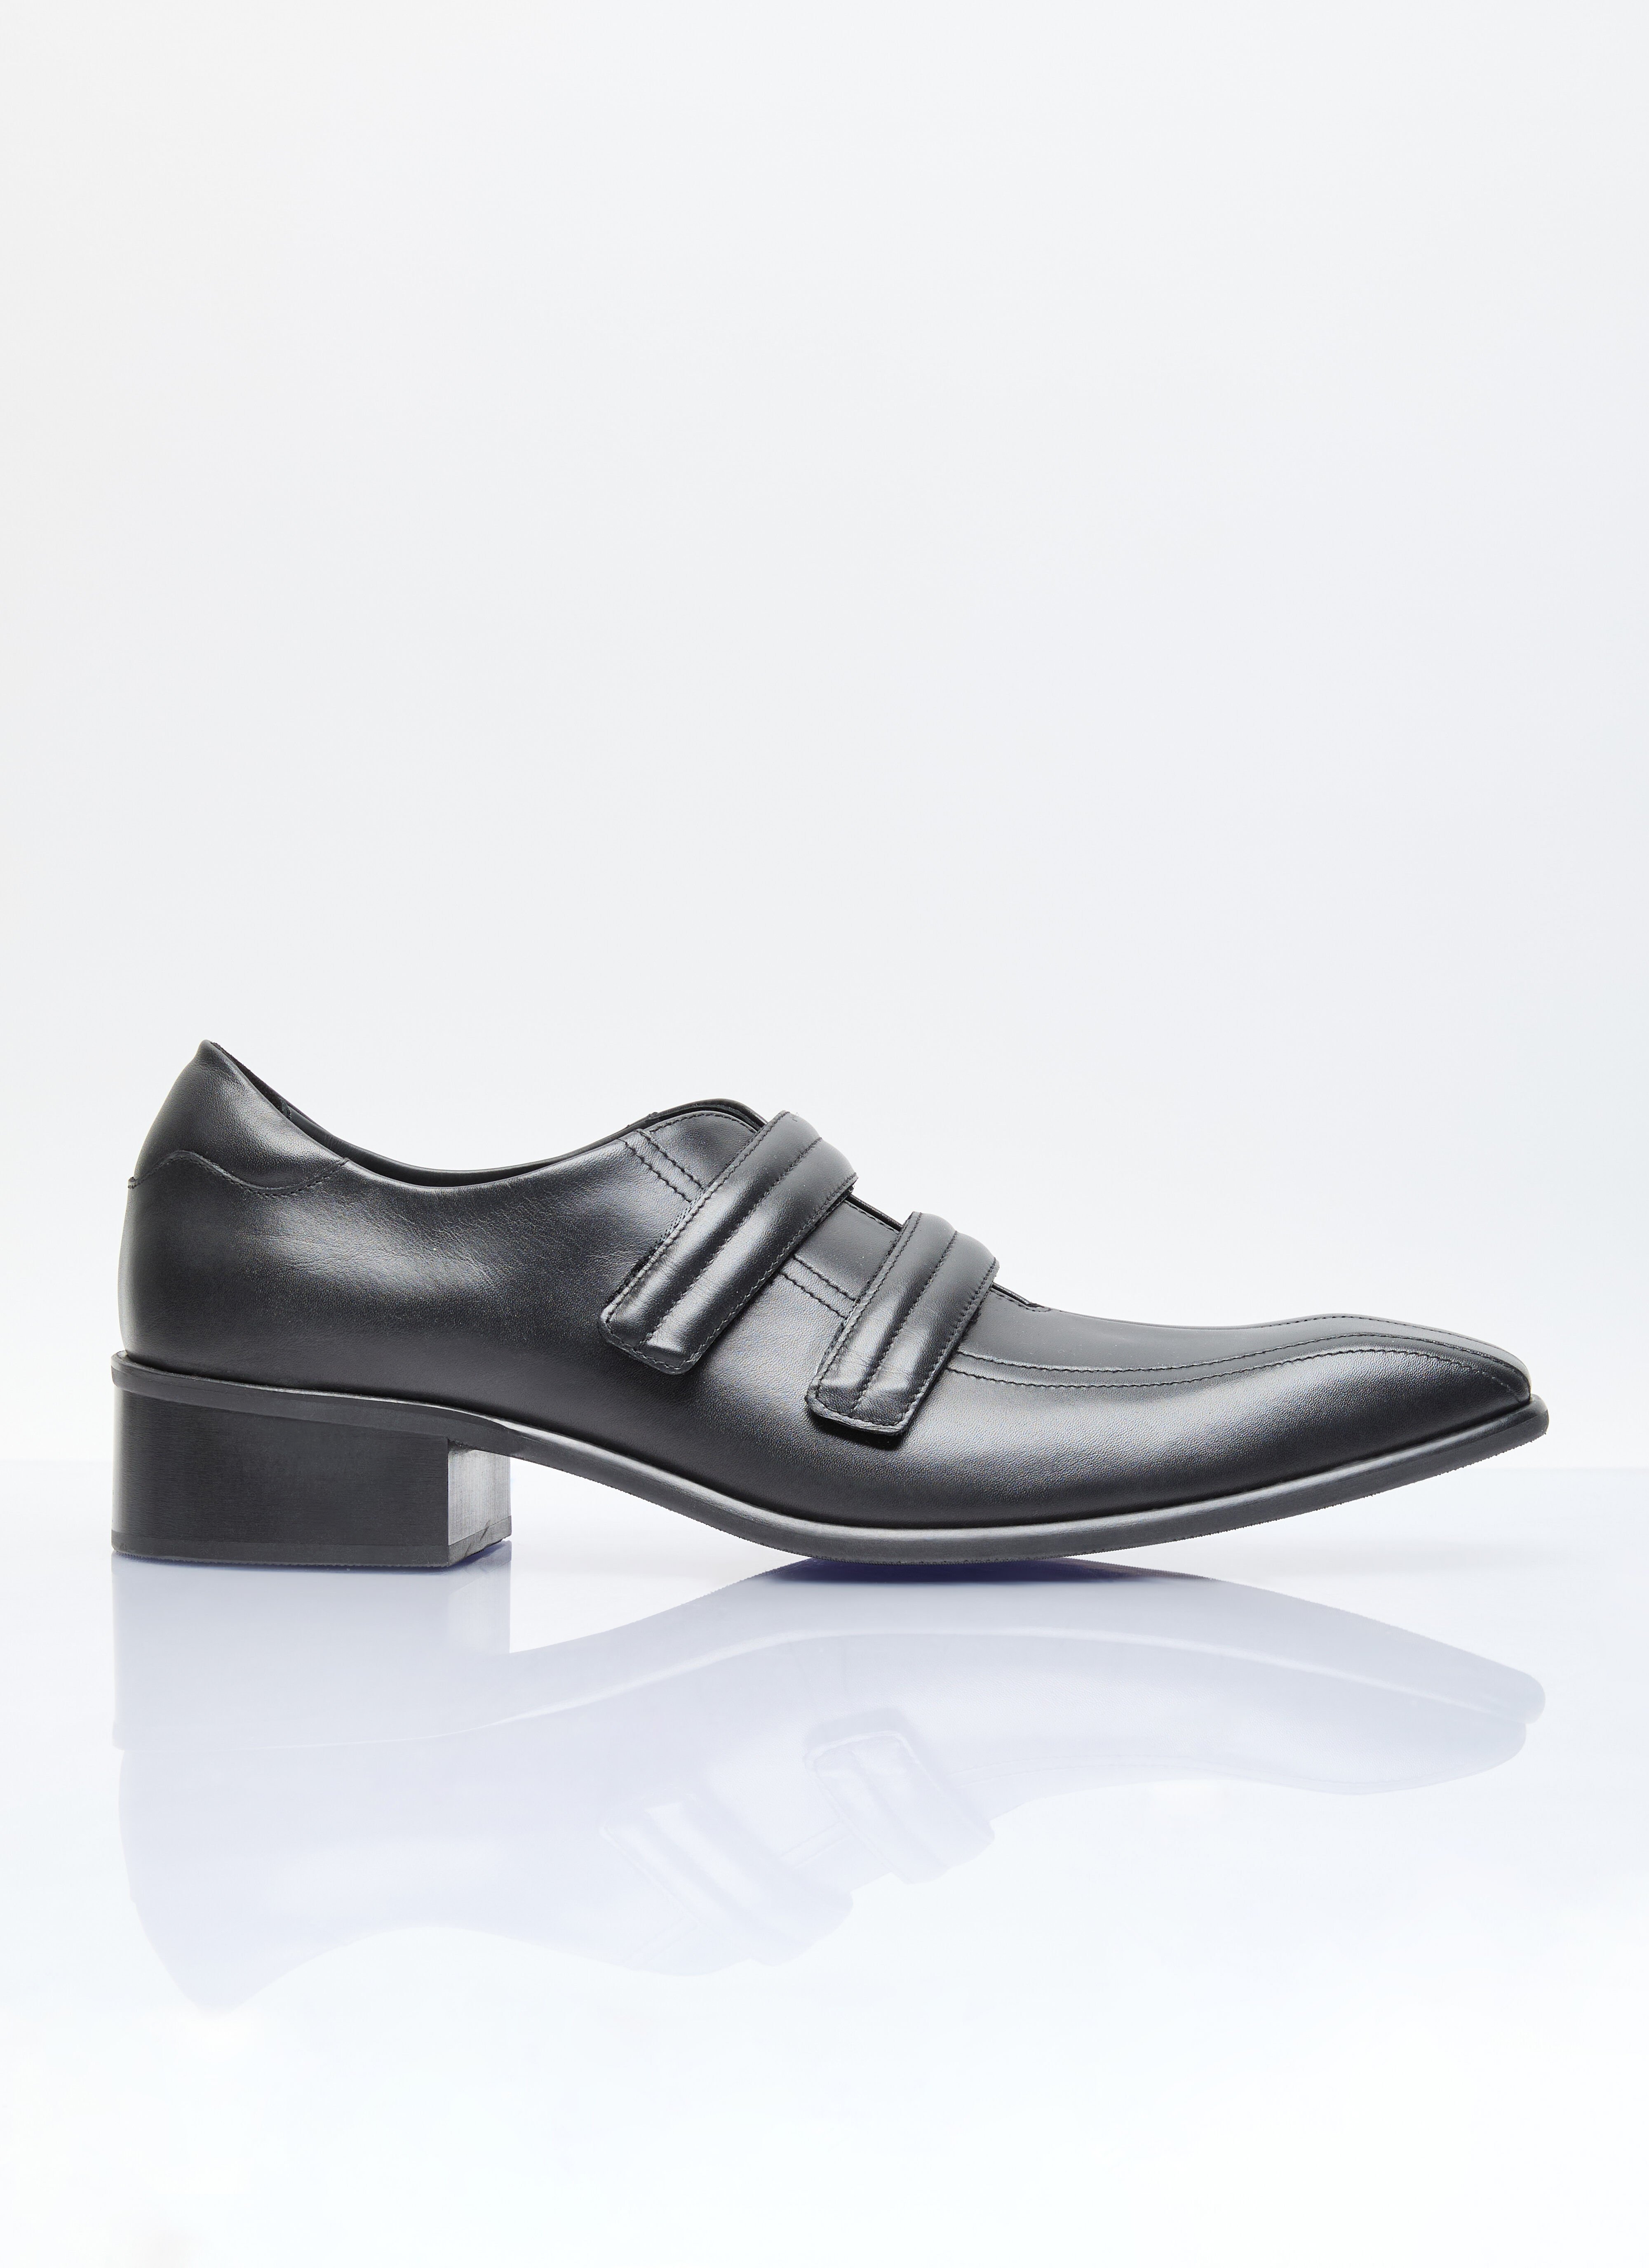 Thom Browne Exaggerated Toe Leather Shoes Black thb0155012